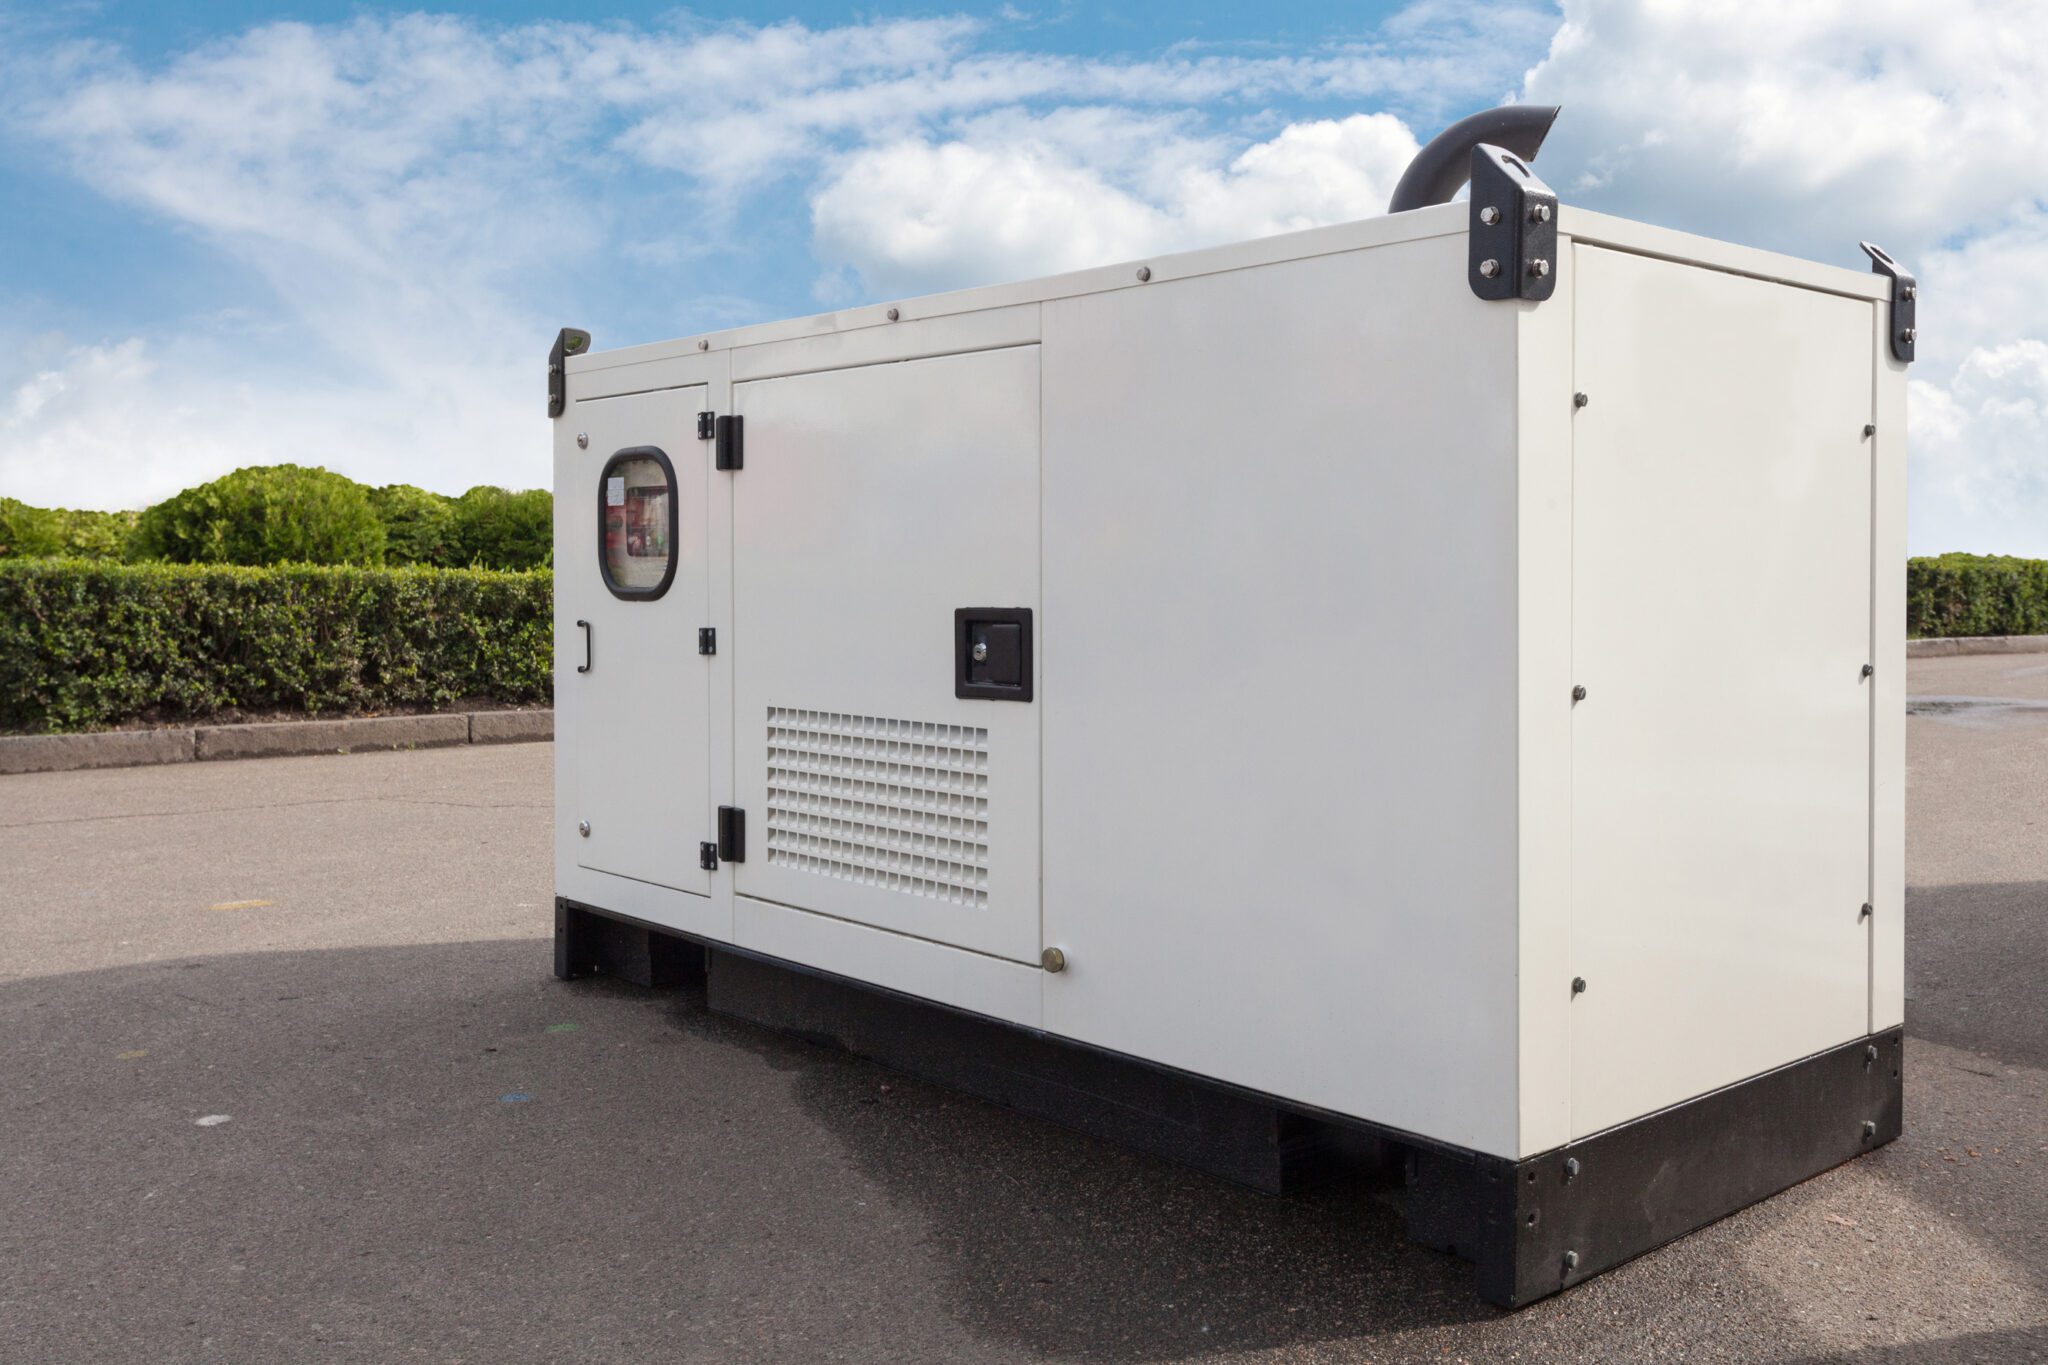 A mobile diesel generator with a white enclosure used for emergency electric power.